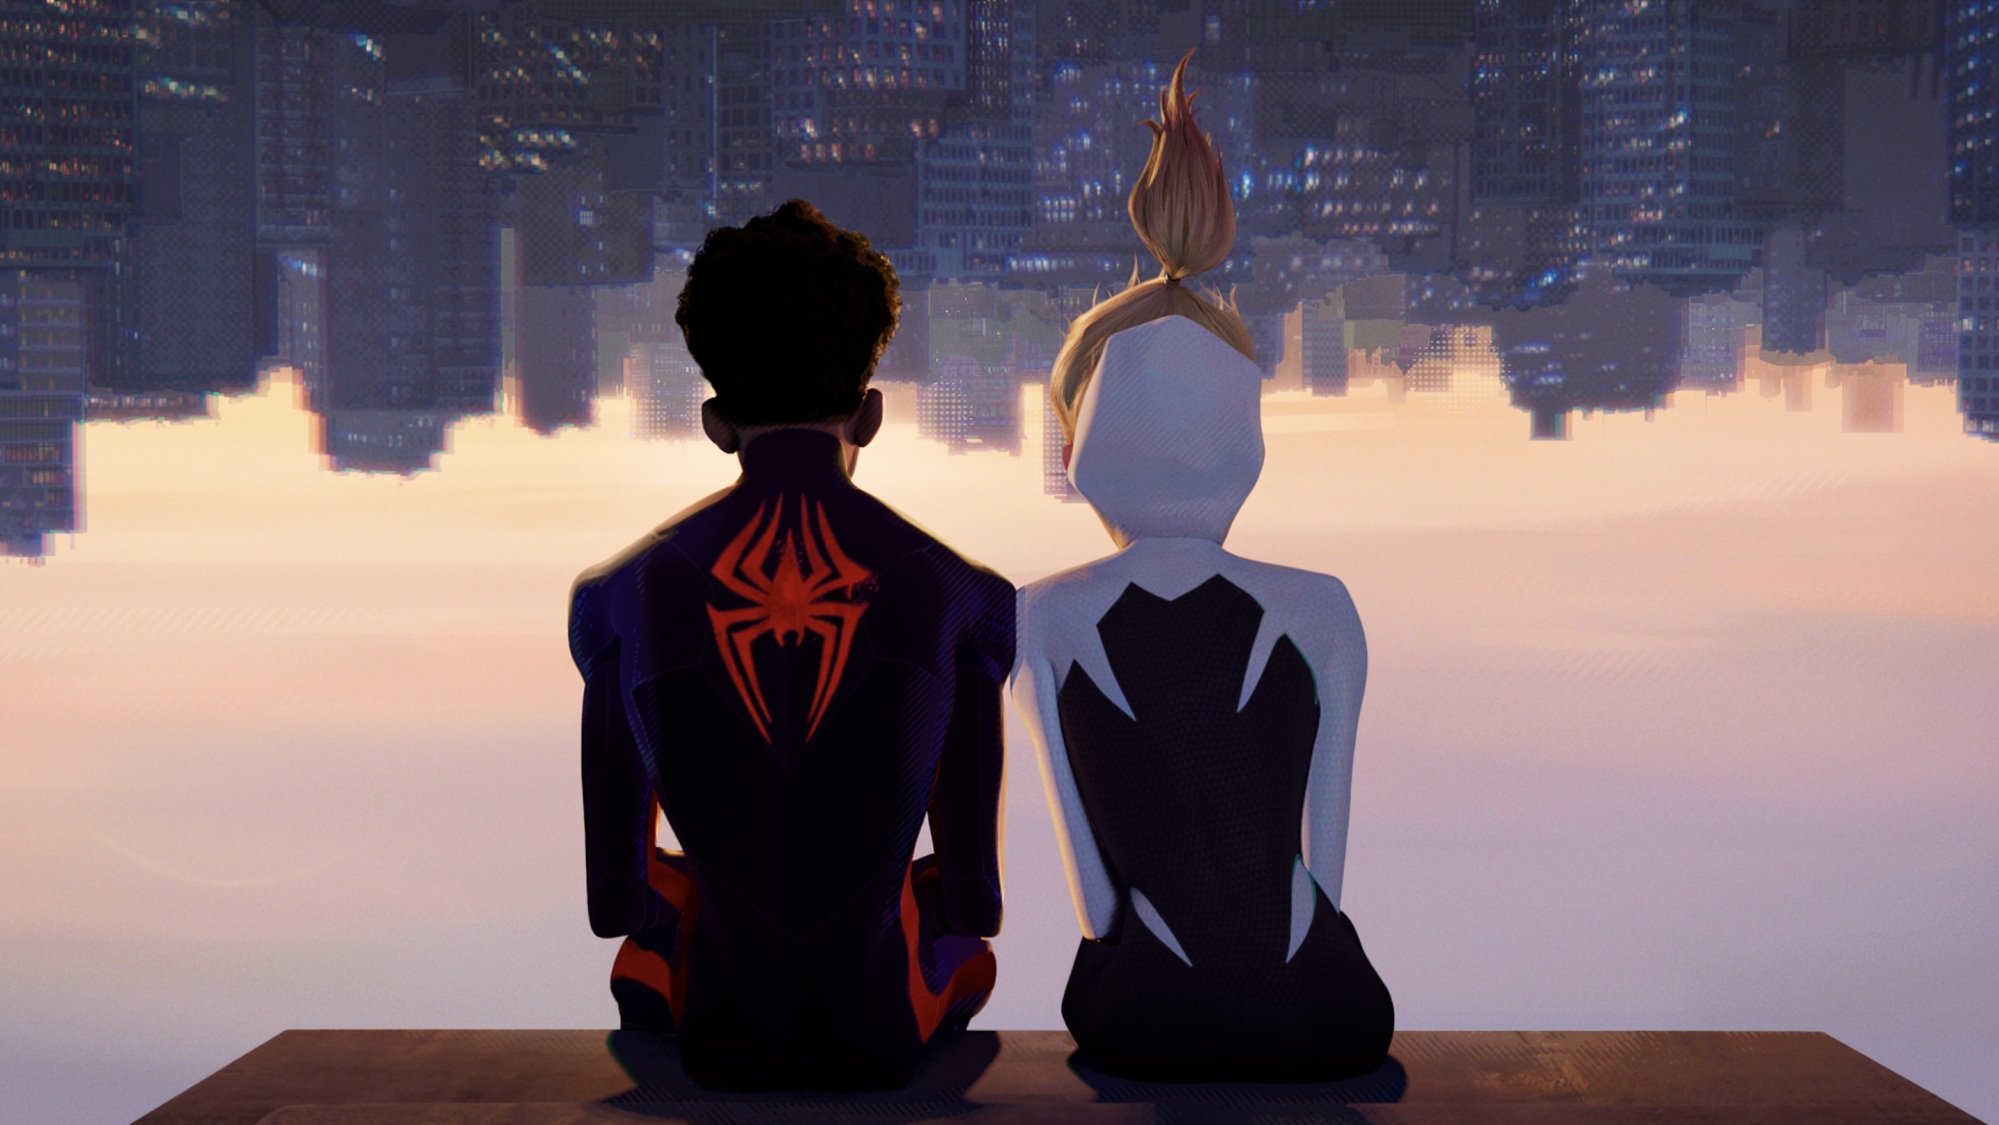 Miles Morales in his red and black Spider-Man and Gwen Stacy in her white and black Spider-Woman suit sit upside down on a building ledge.